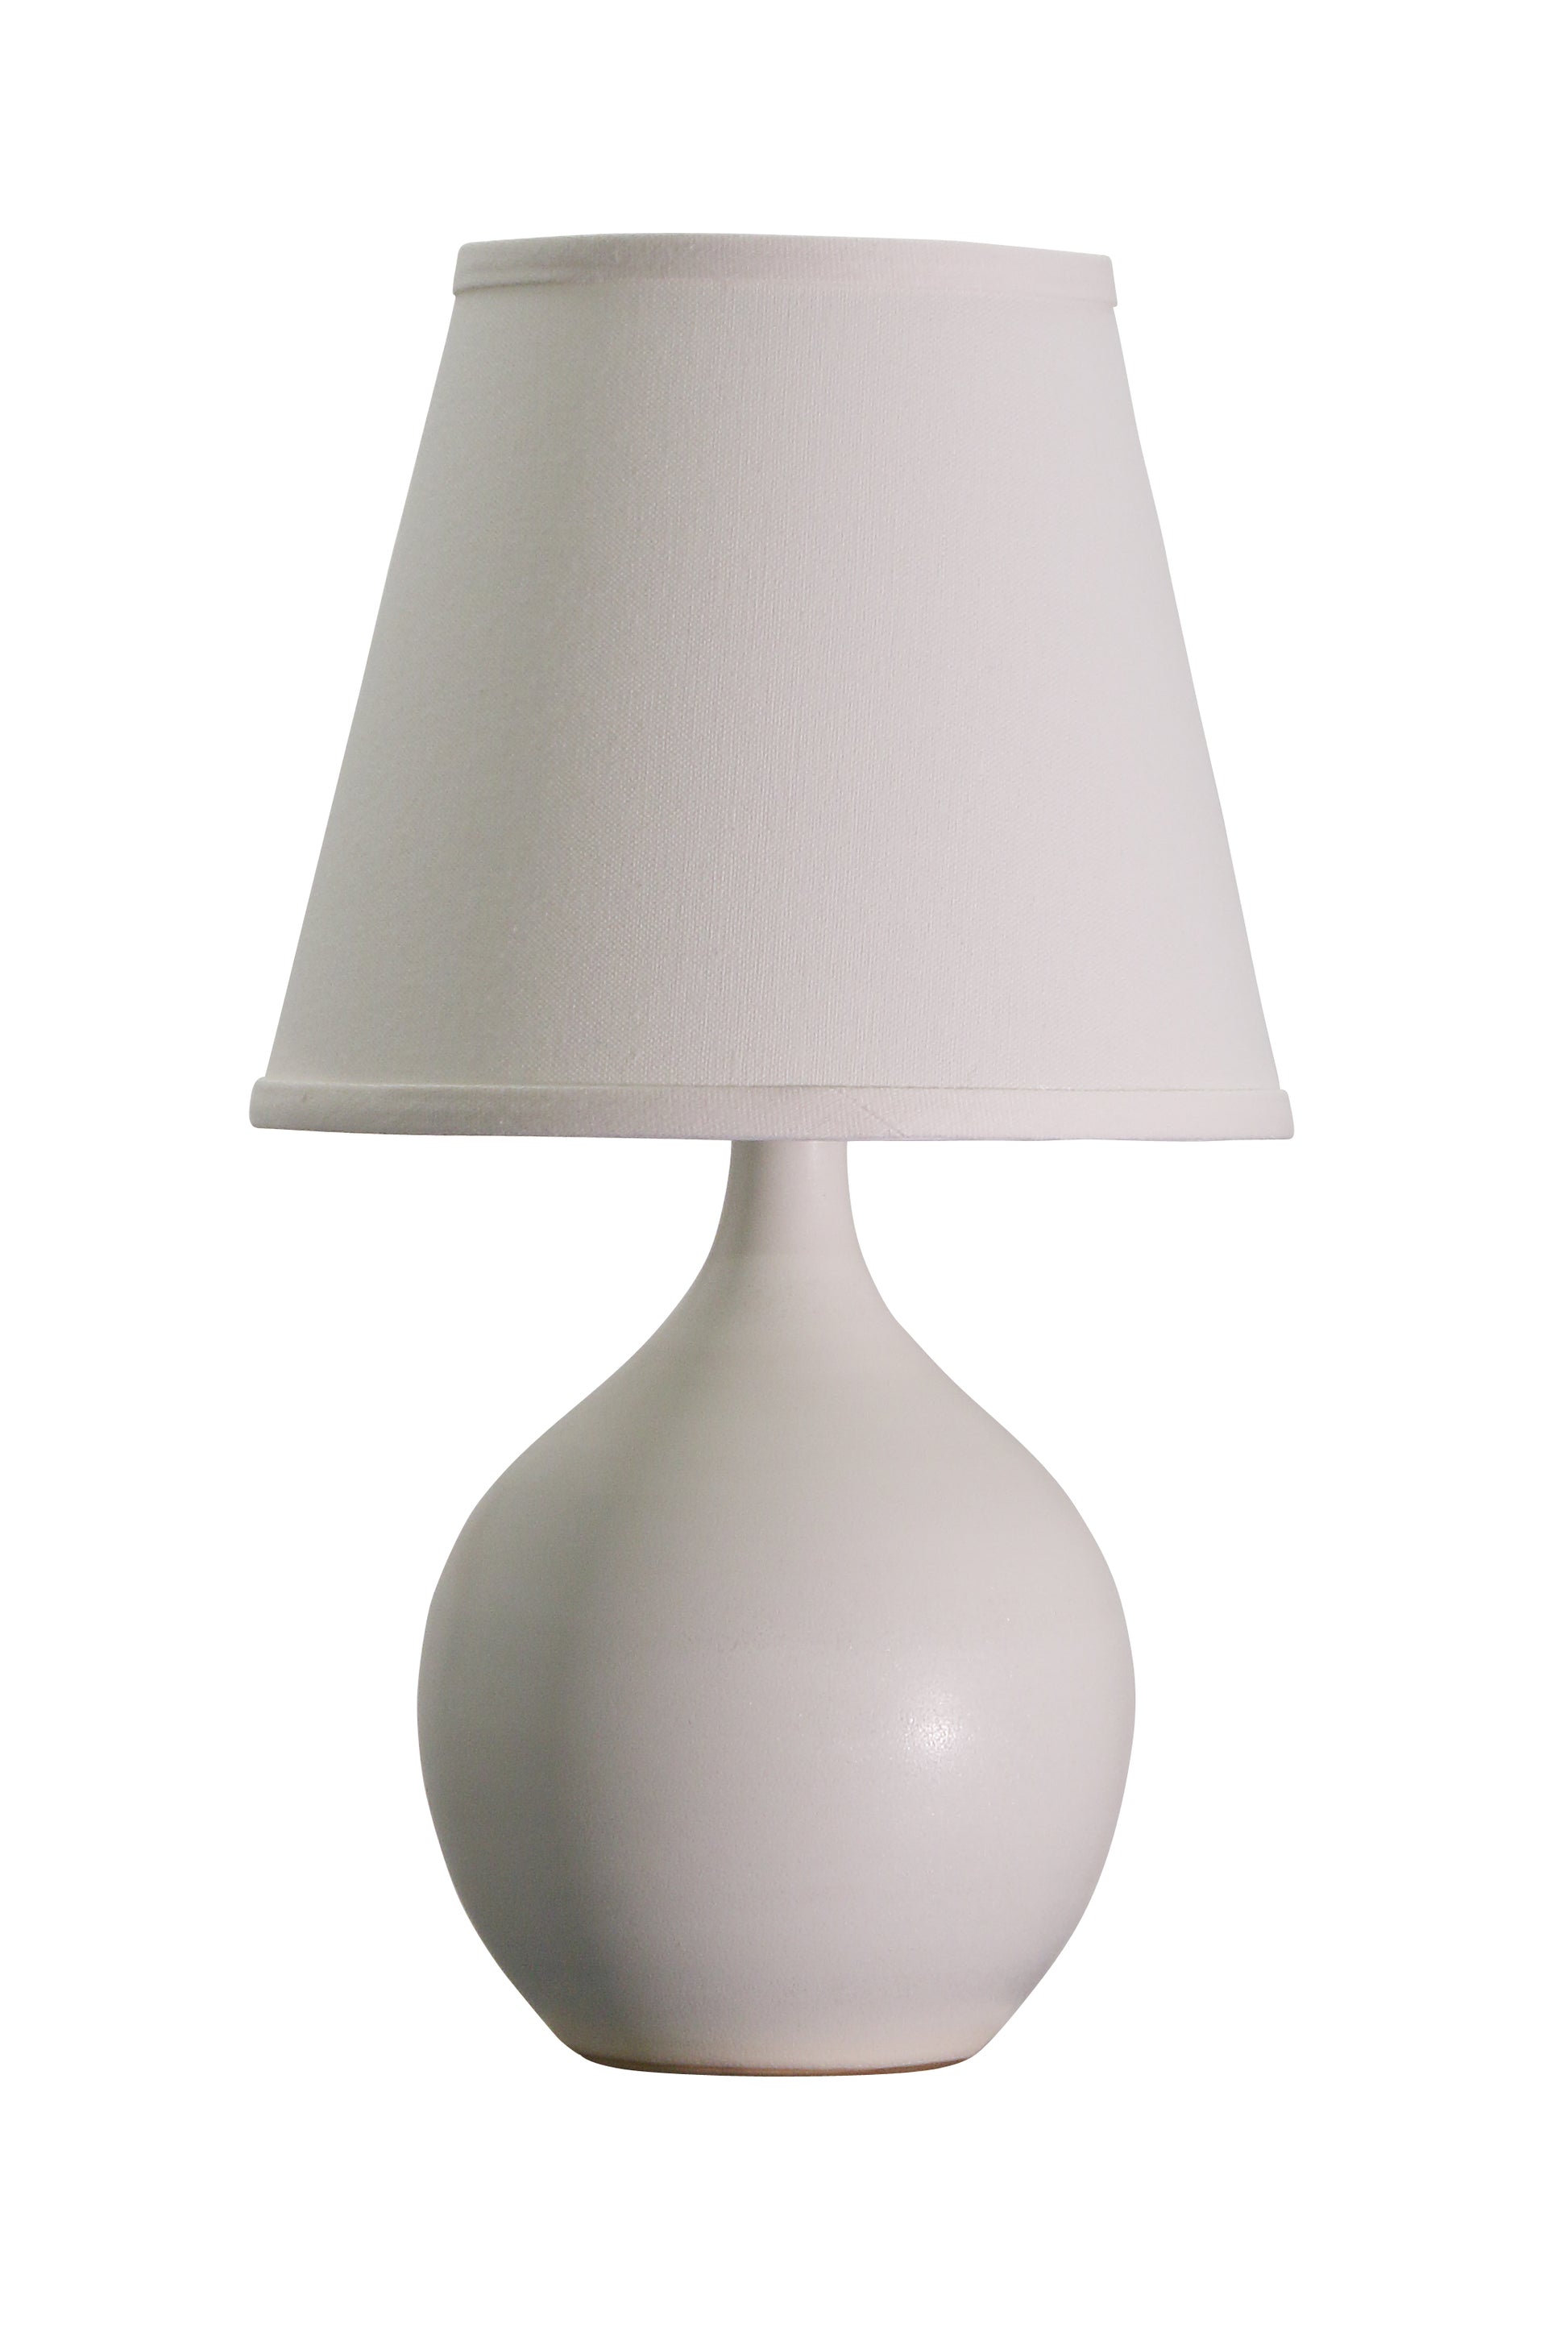 House of Troy Scatchard 13.5" Mini Accent Lamp White Matte GS50-WM